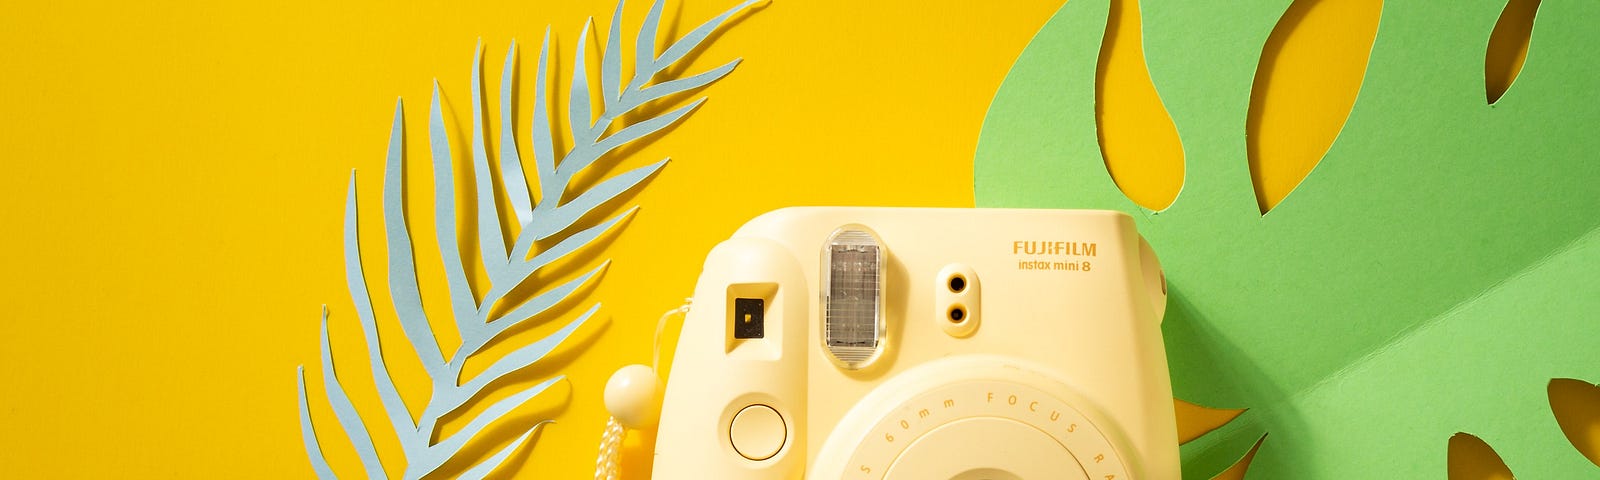 a fuji camera beside two green paper cutouts of leaves, on a yellow background